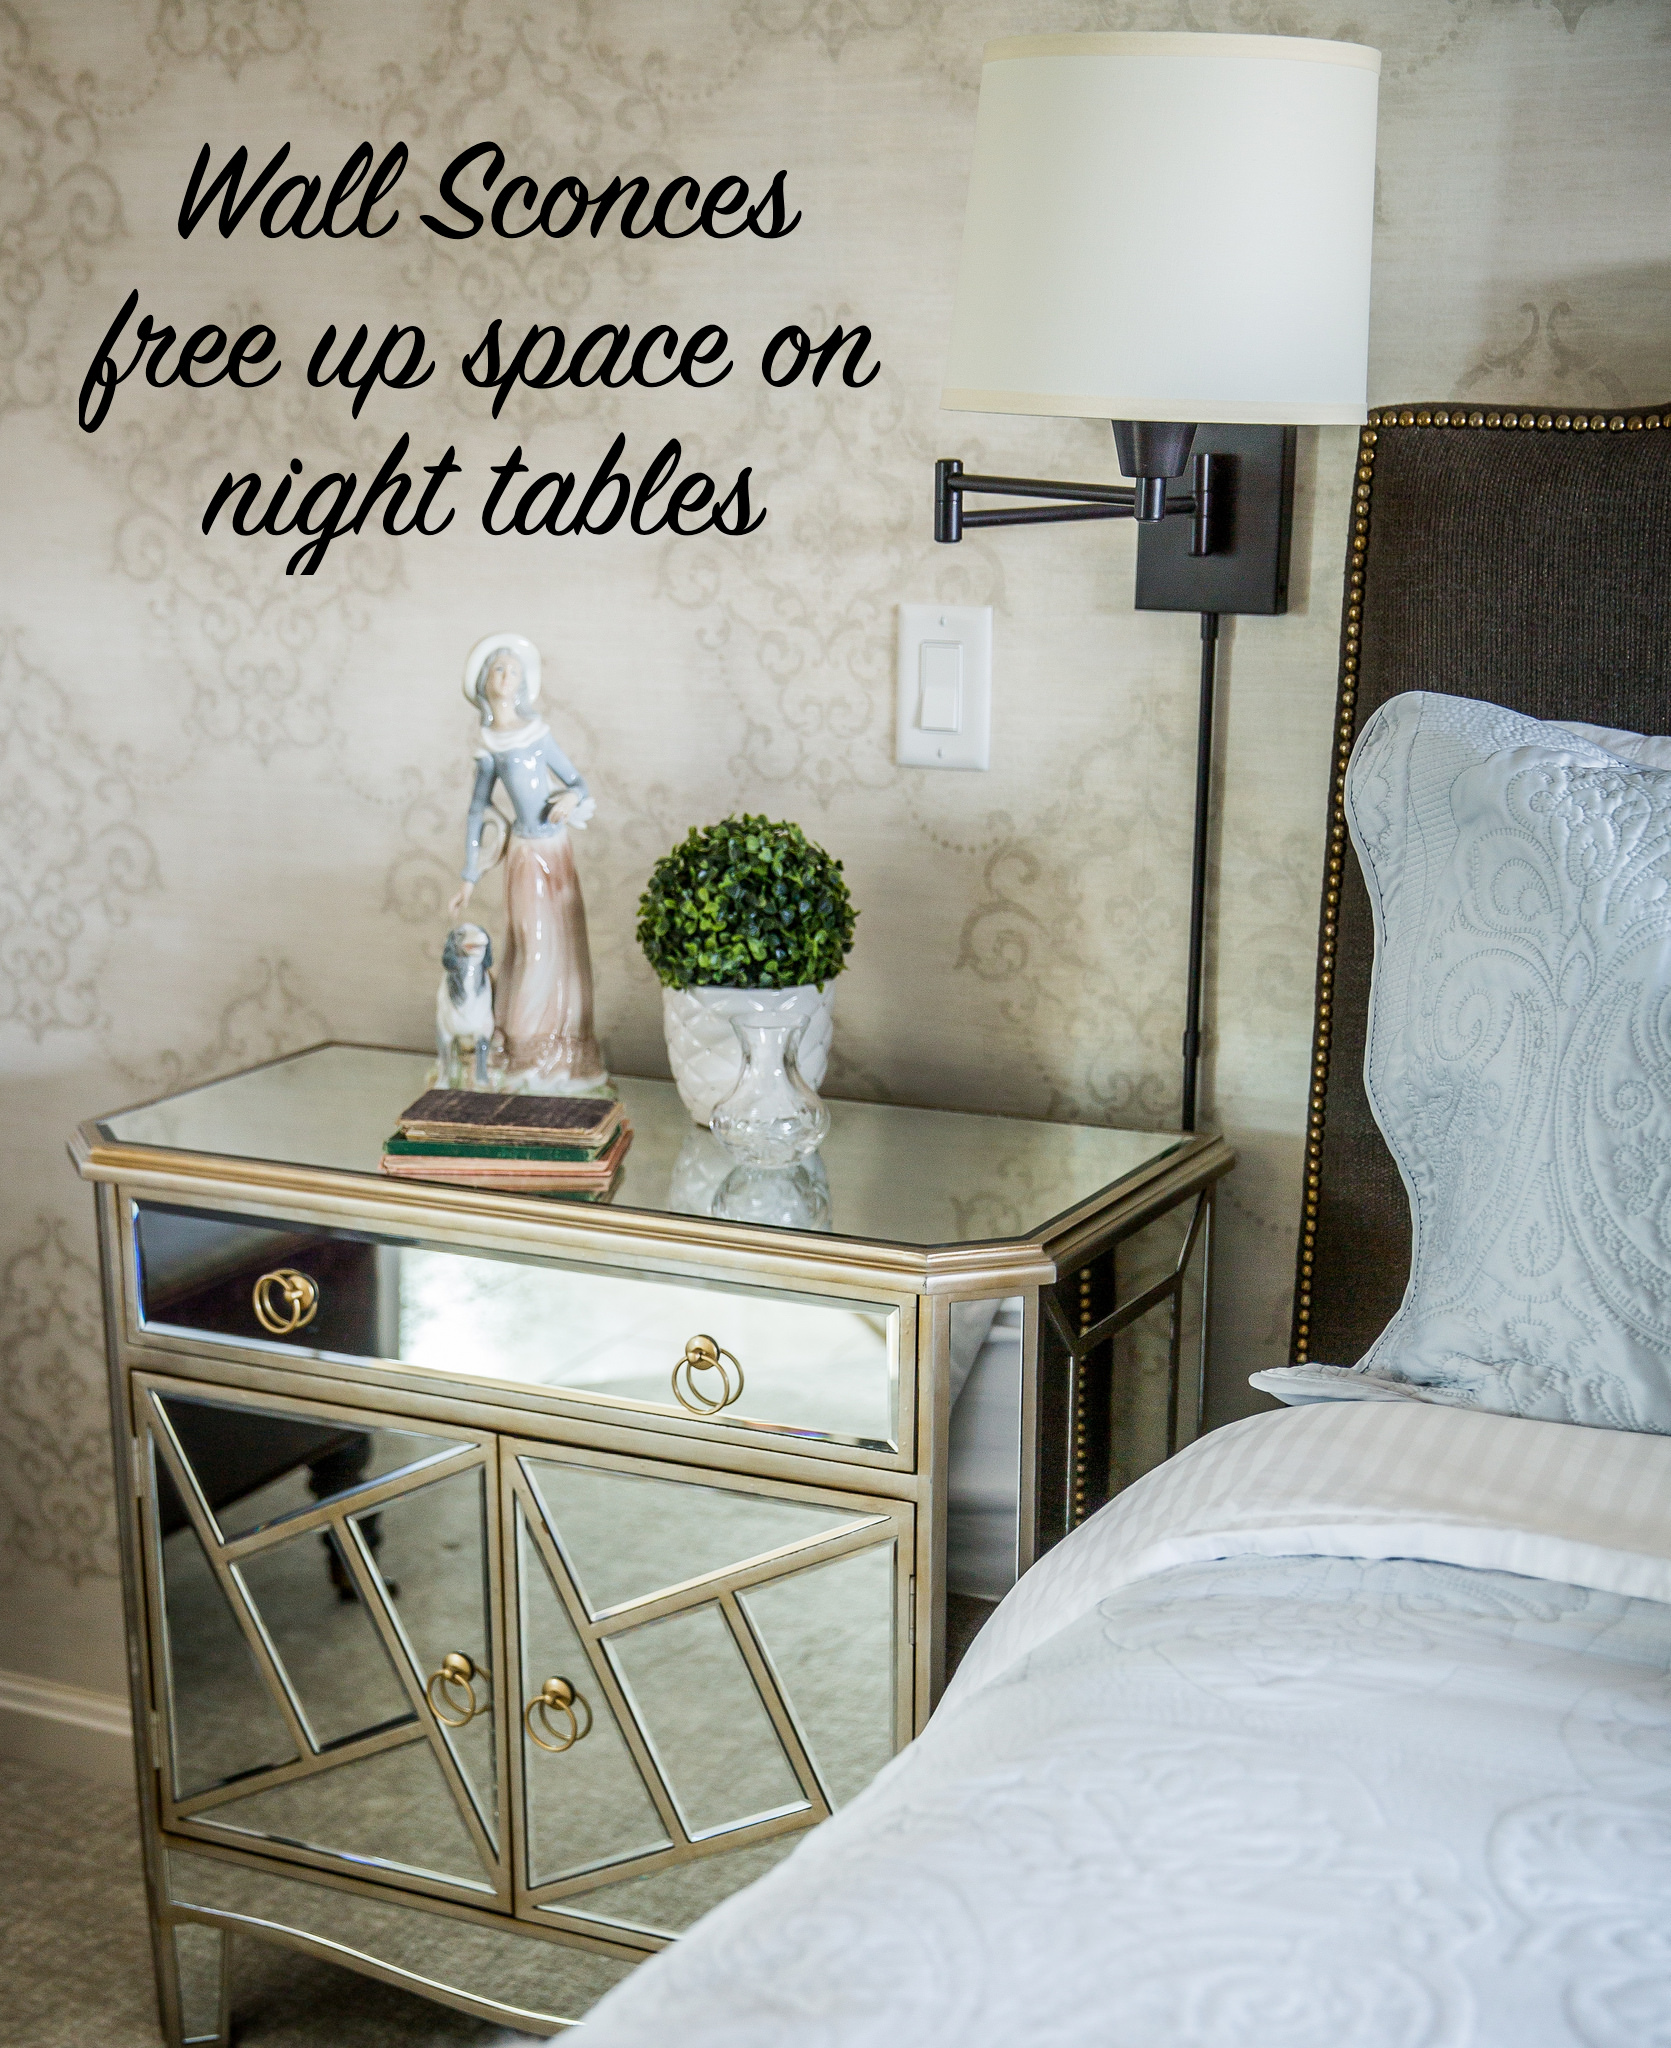 Using wall sconces allows for more room on night tables